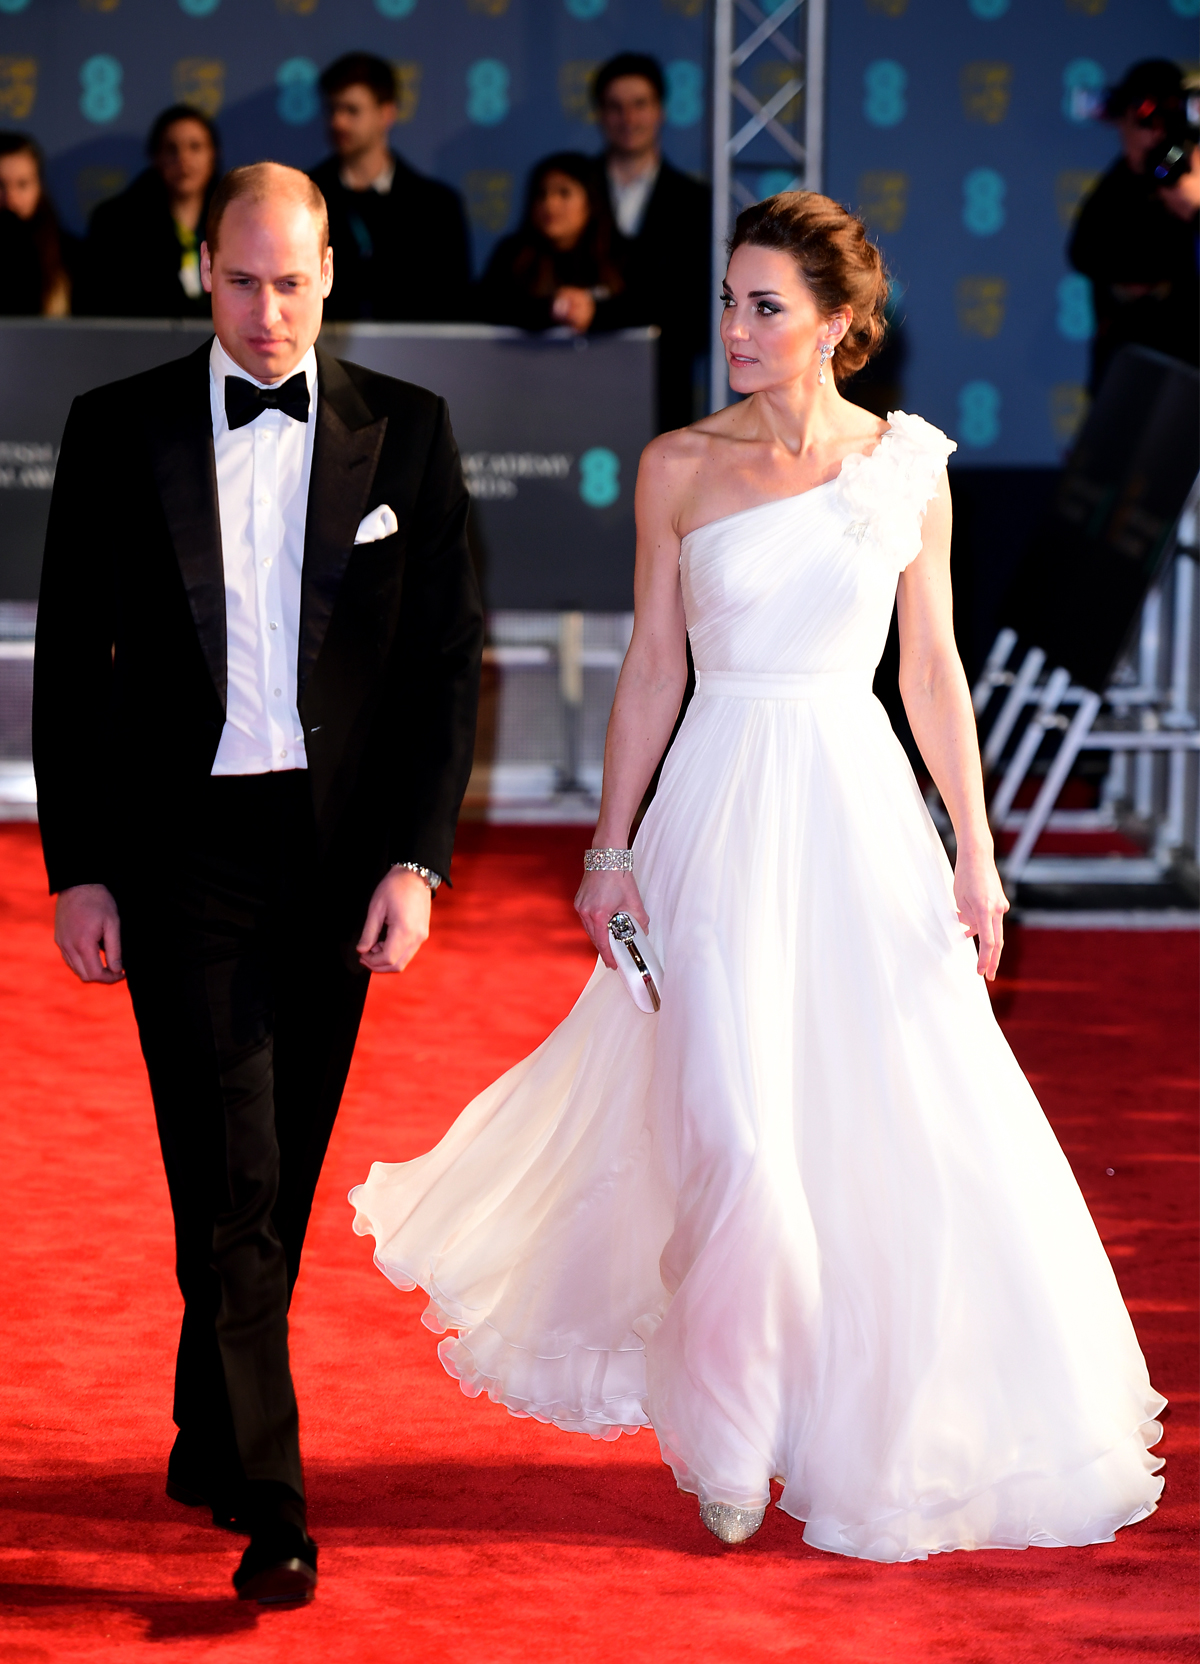 Baftas red carpet 2019: Kate Middleton in white one-shoulder gown and Prince William